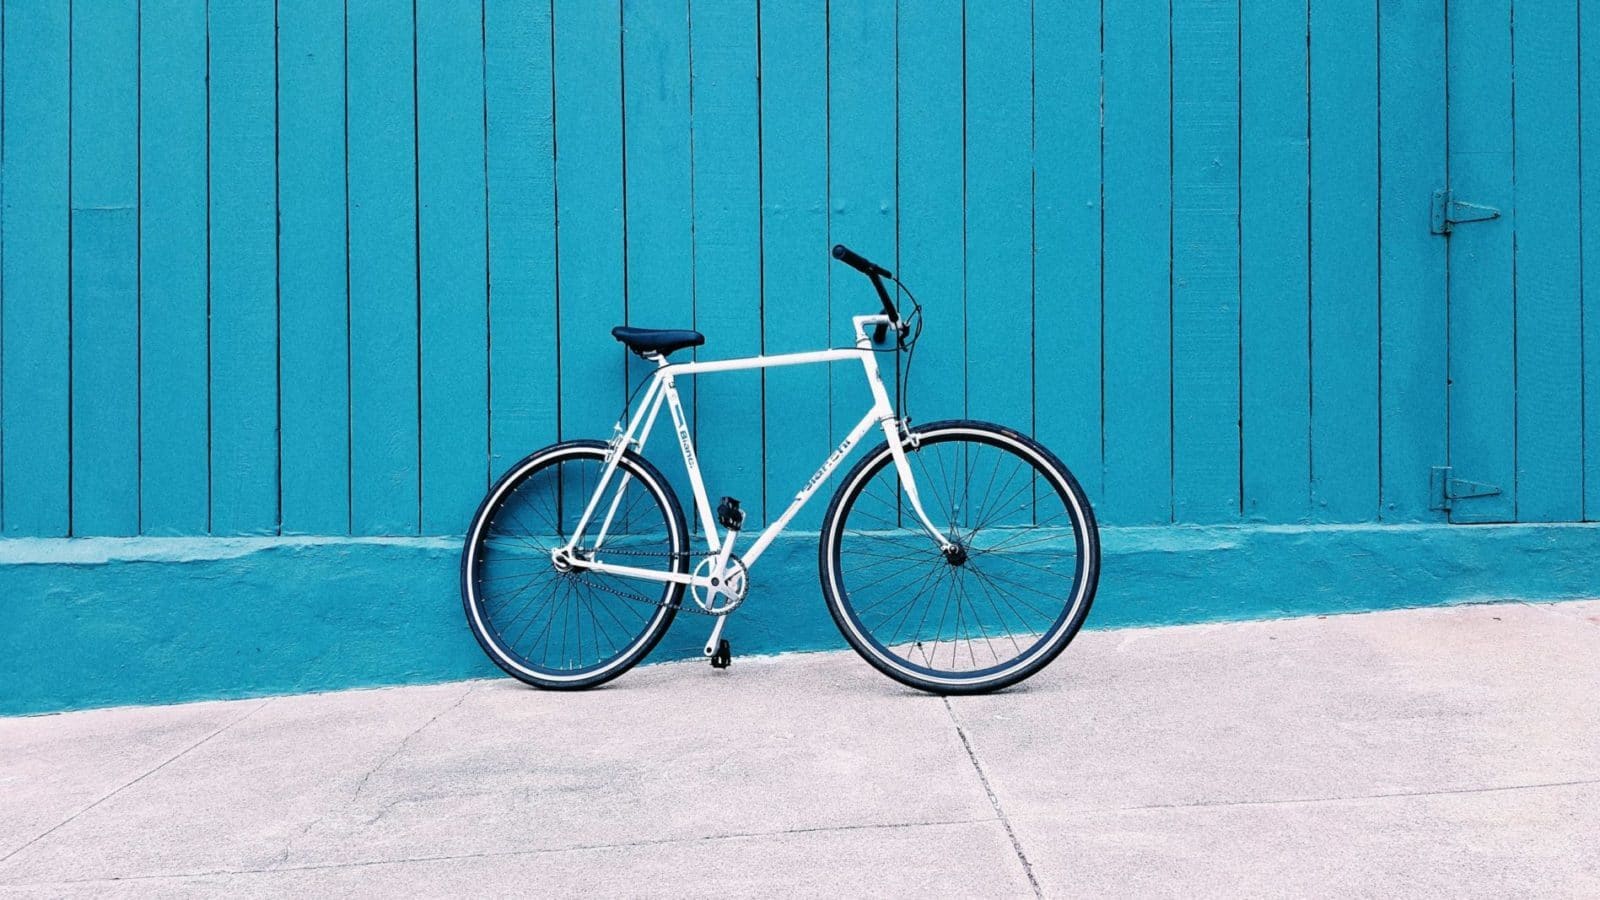 white road bike leaning on teal wooden wall during daytime